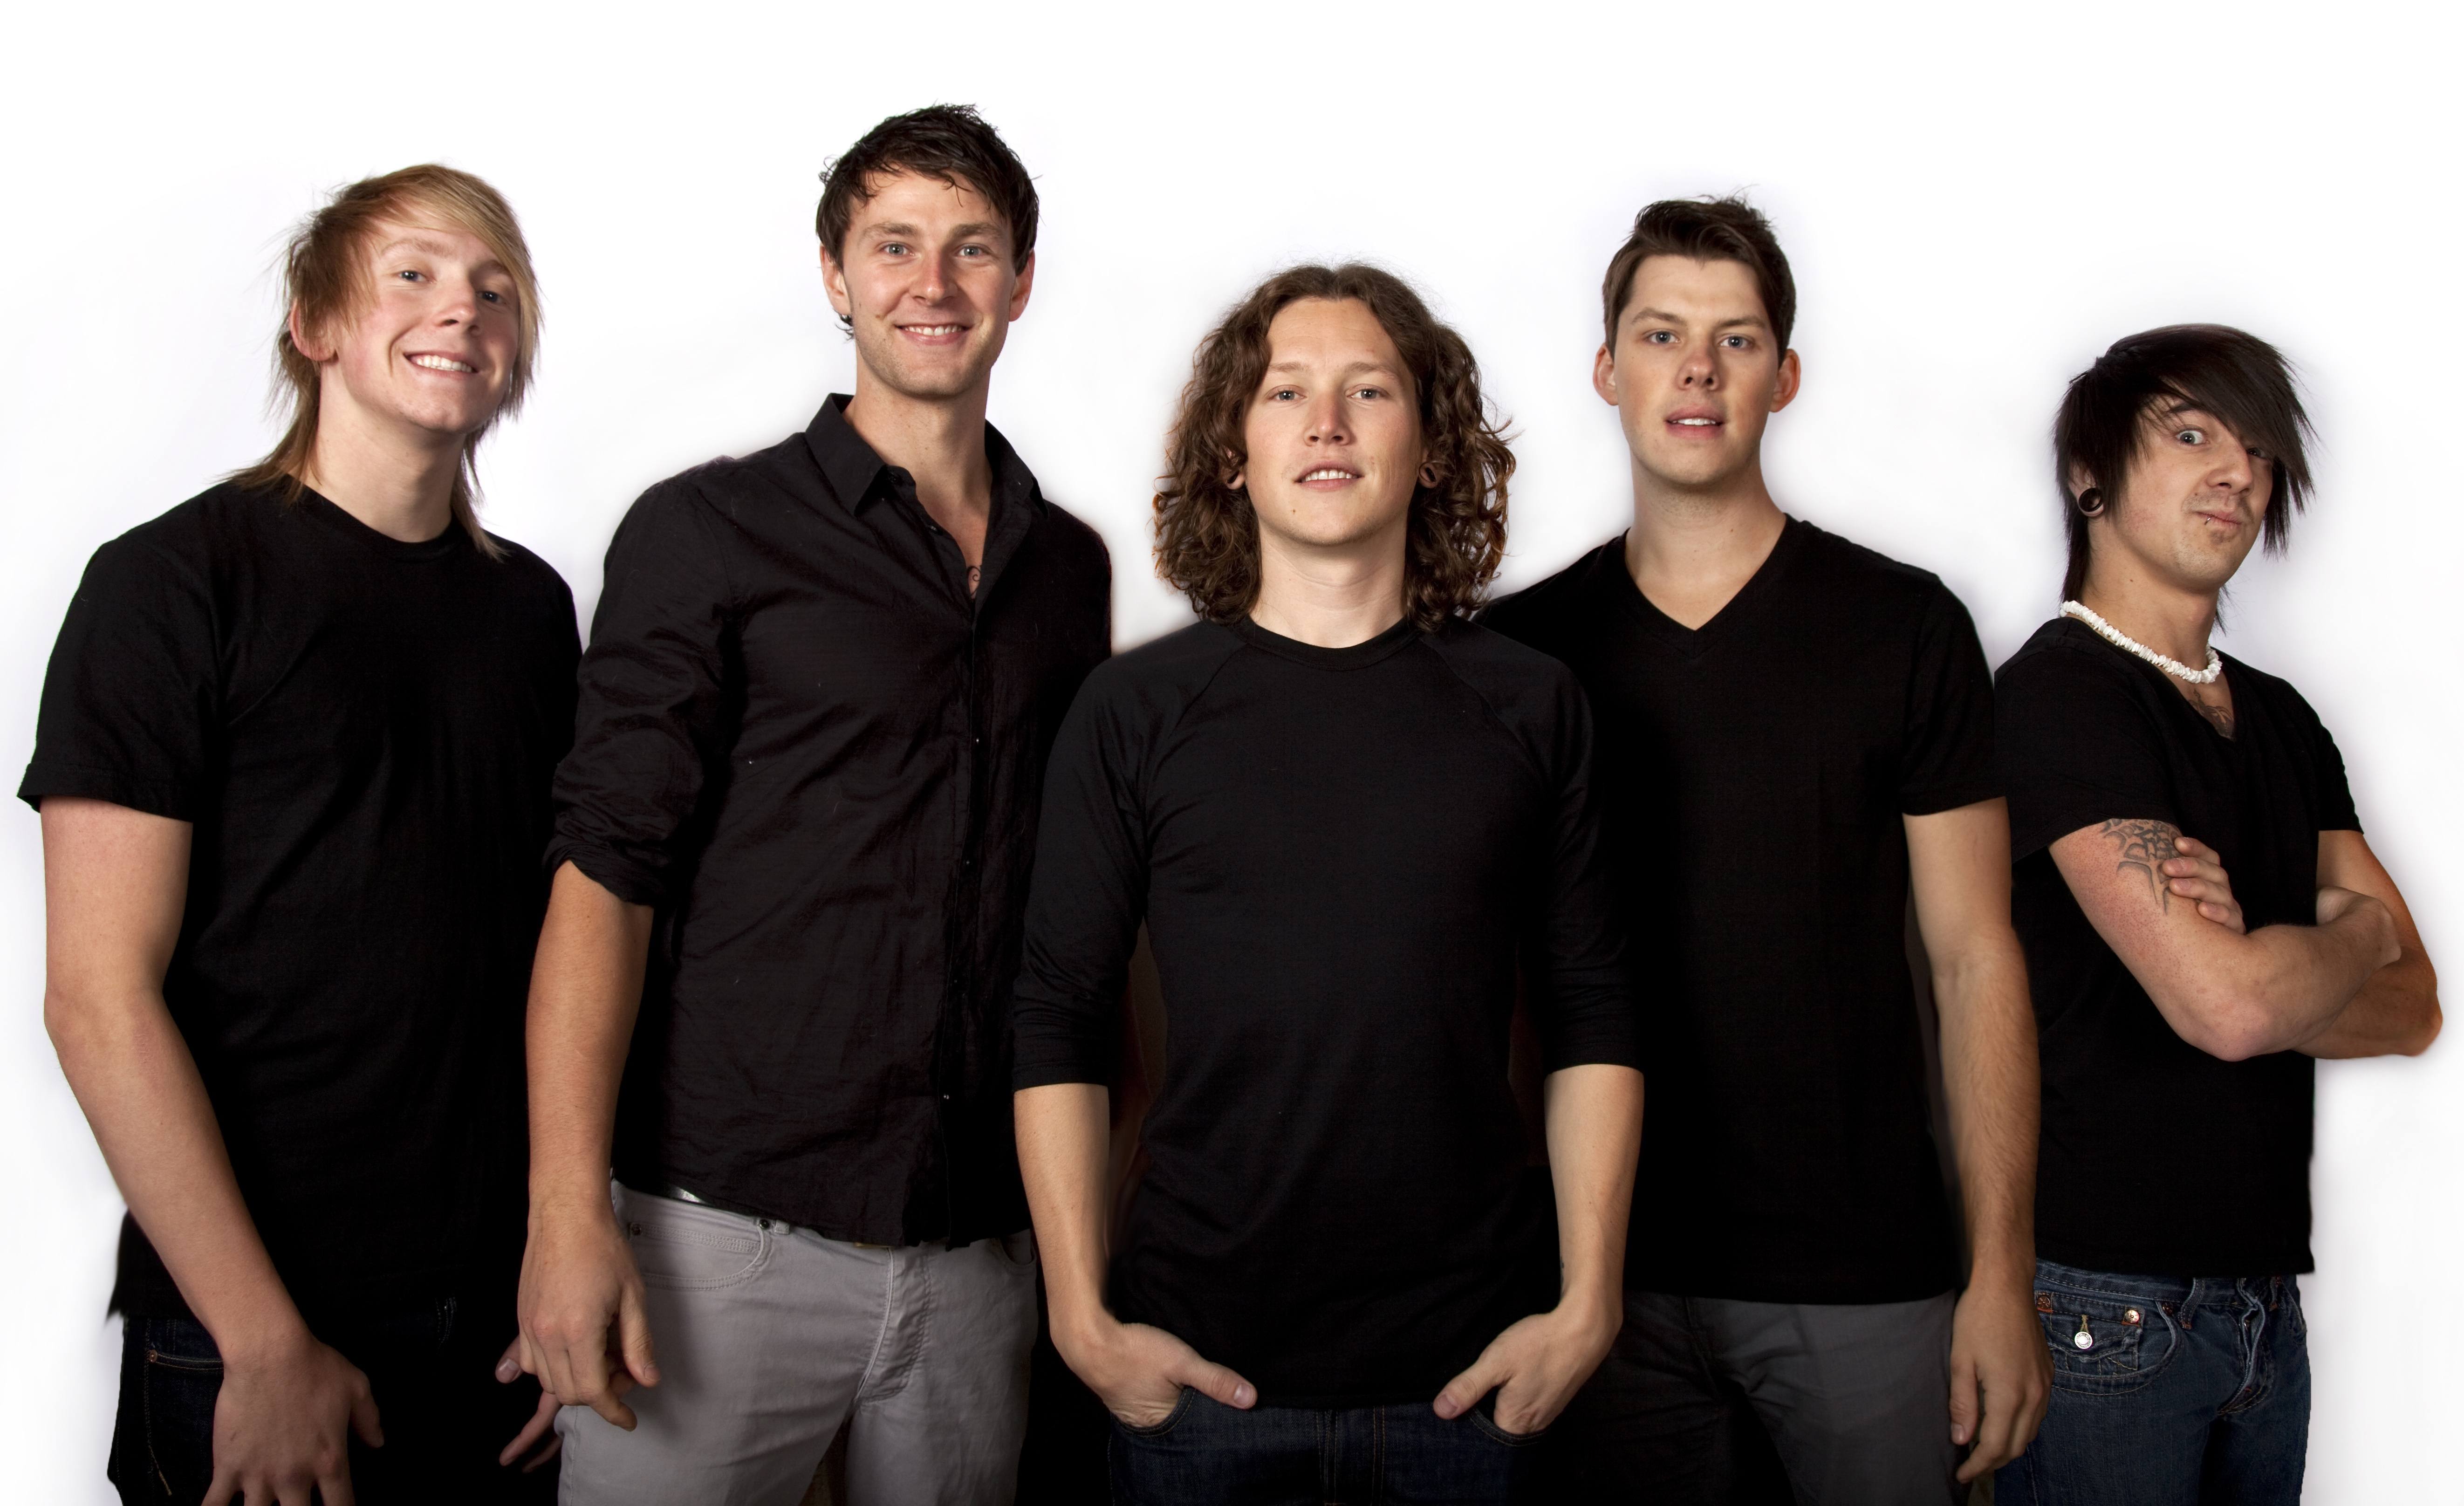 RAW TALENT – Run Romeo Run is set to take the stage in Red Deer next month.